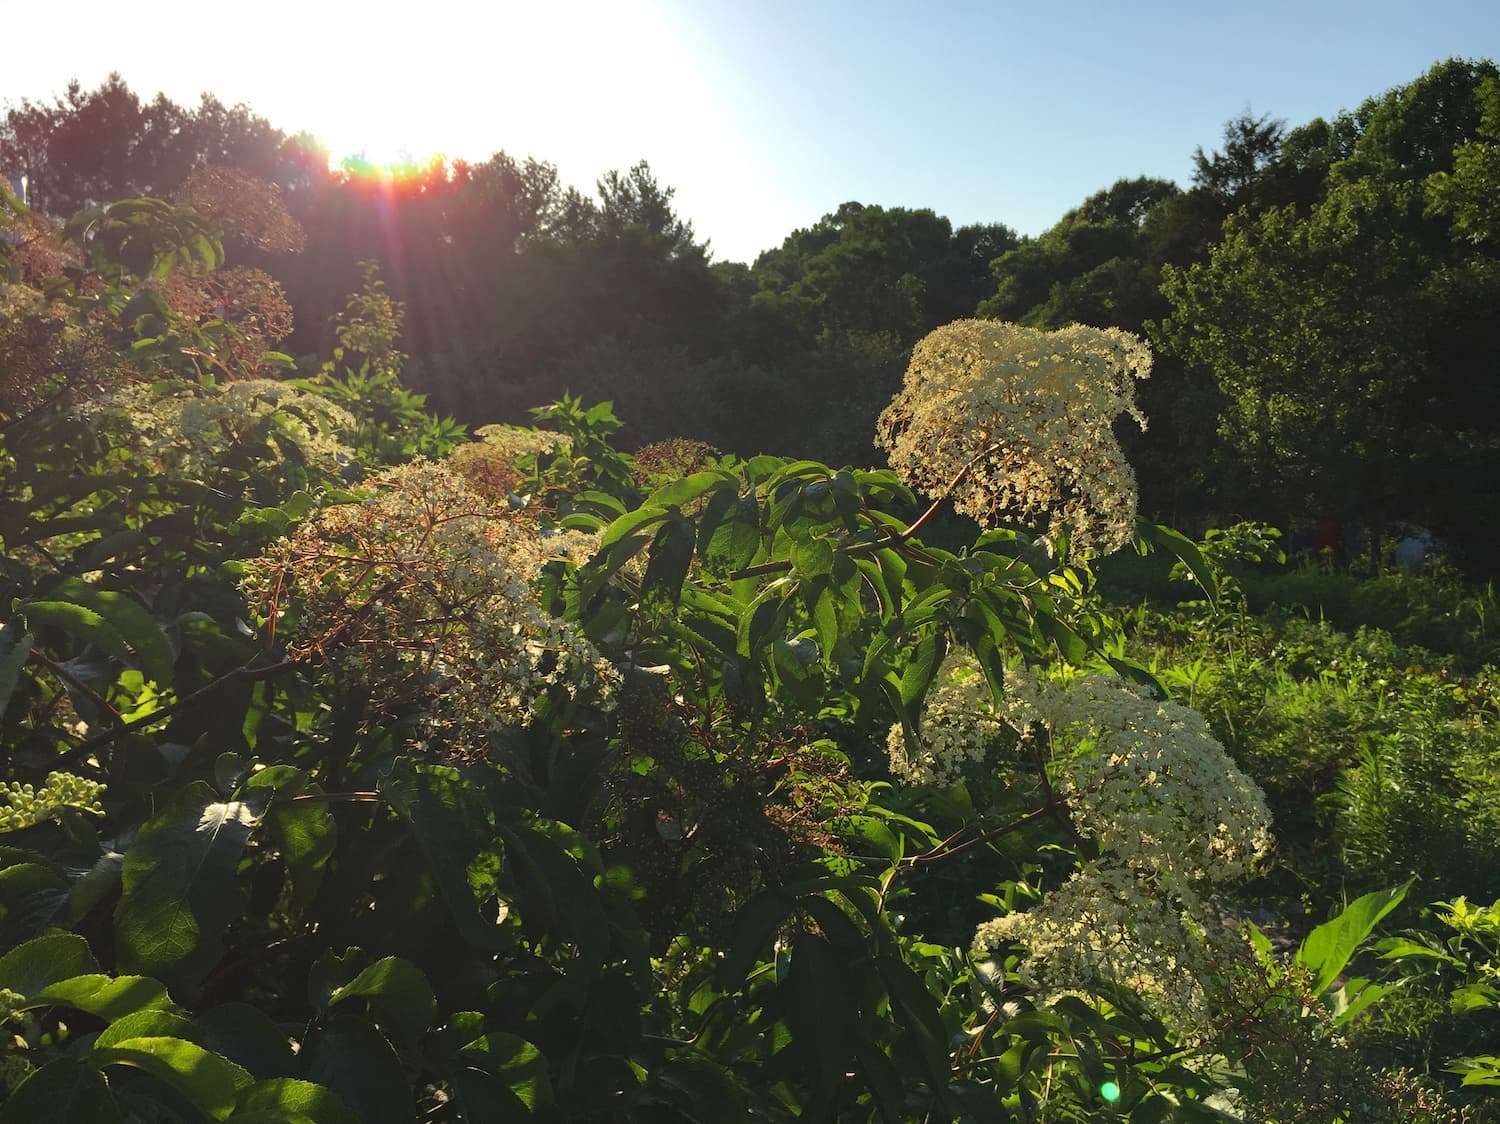 A patch of elderberry bushes in bloom can be a spectacular sight in early summer.